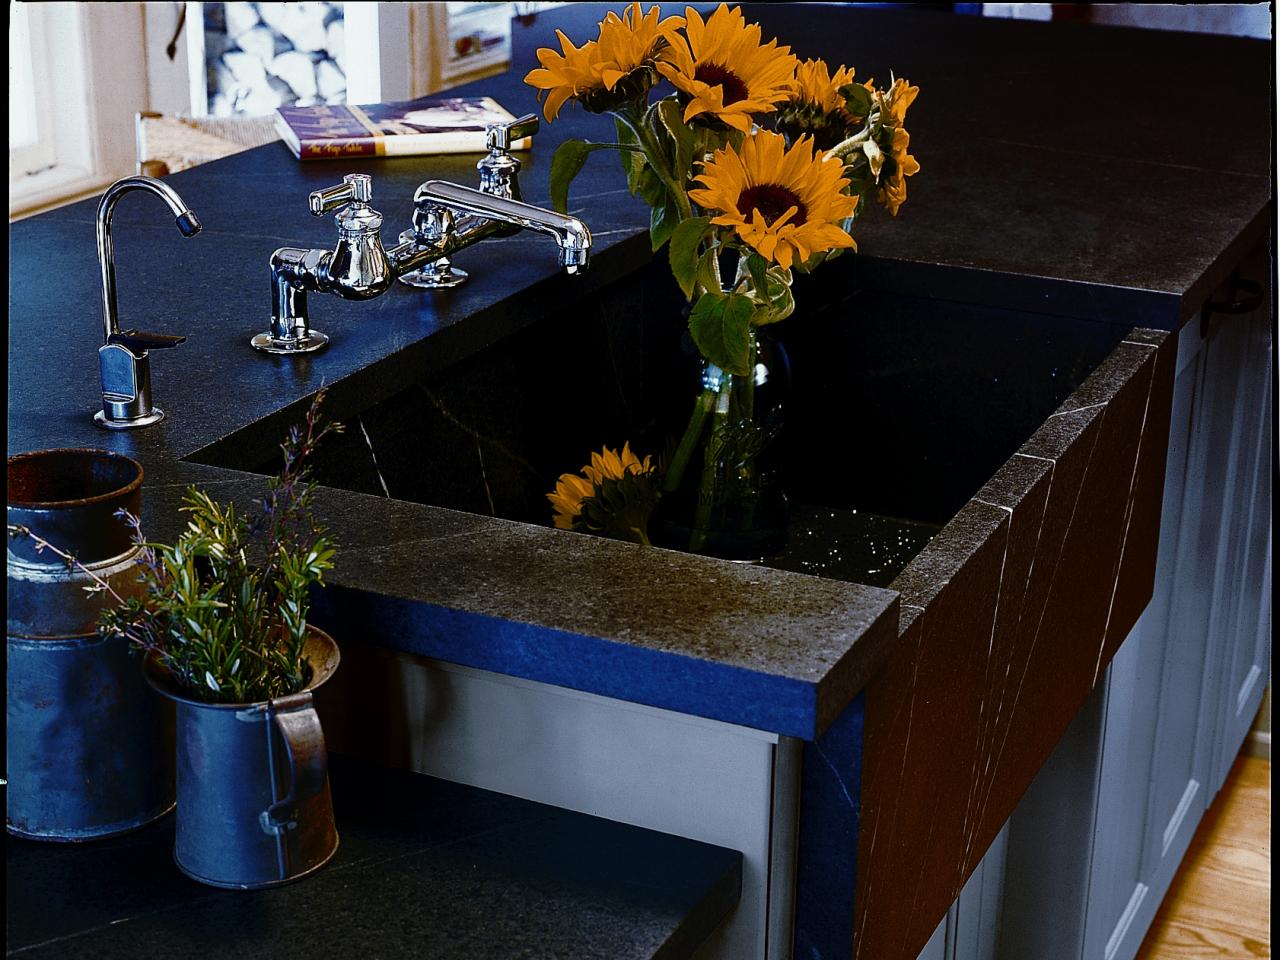 Everything You Need to Know About Soapstone - Granite Liquidators